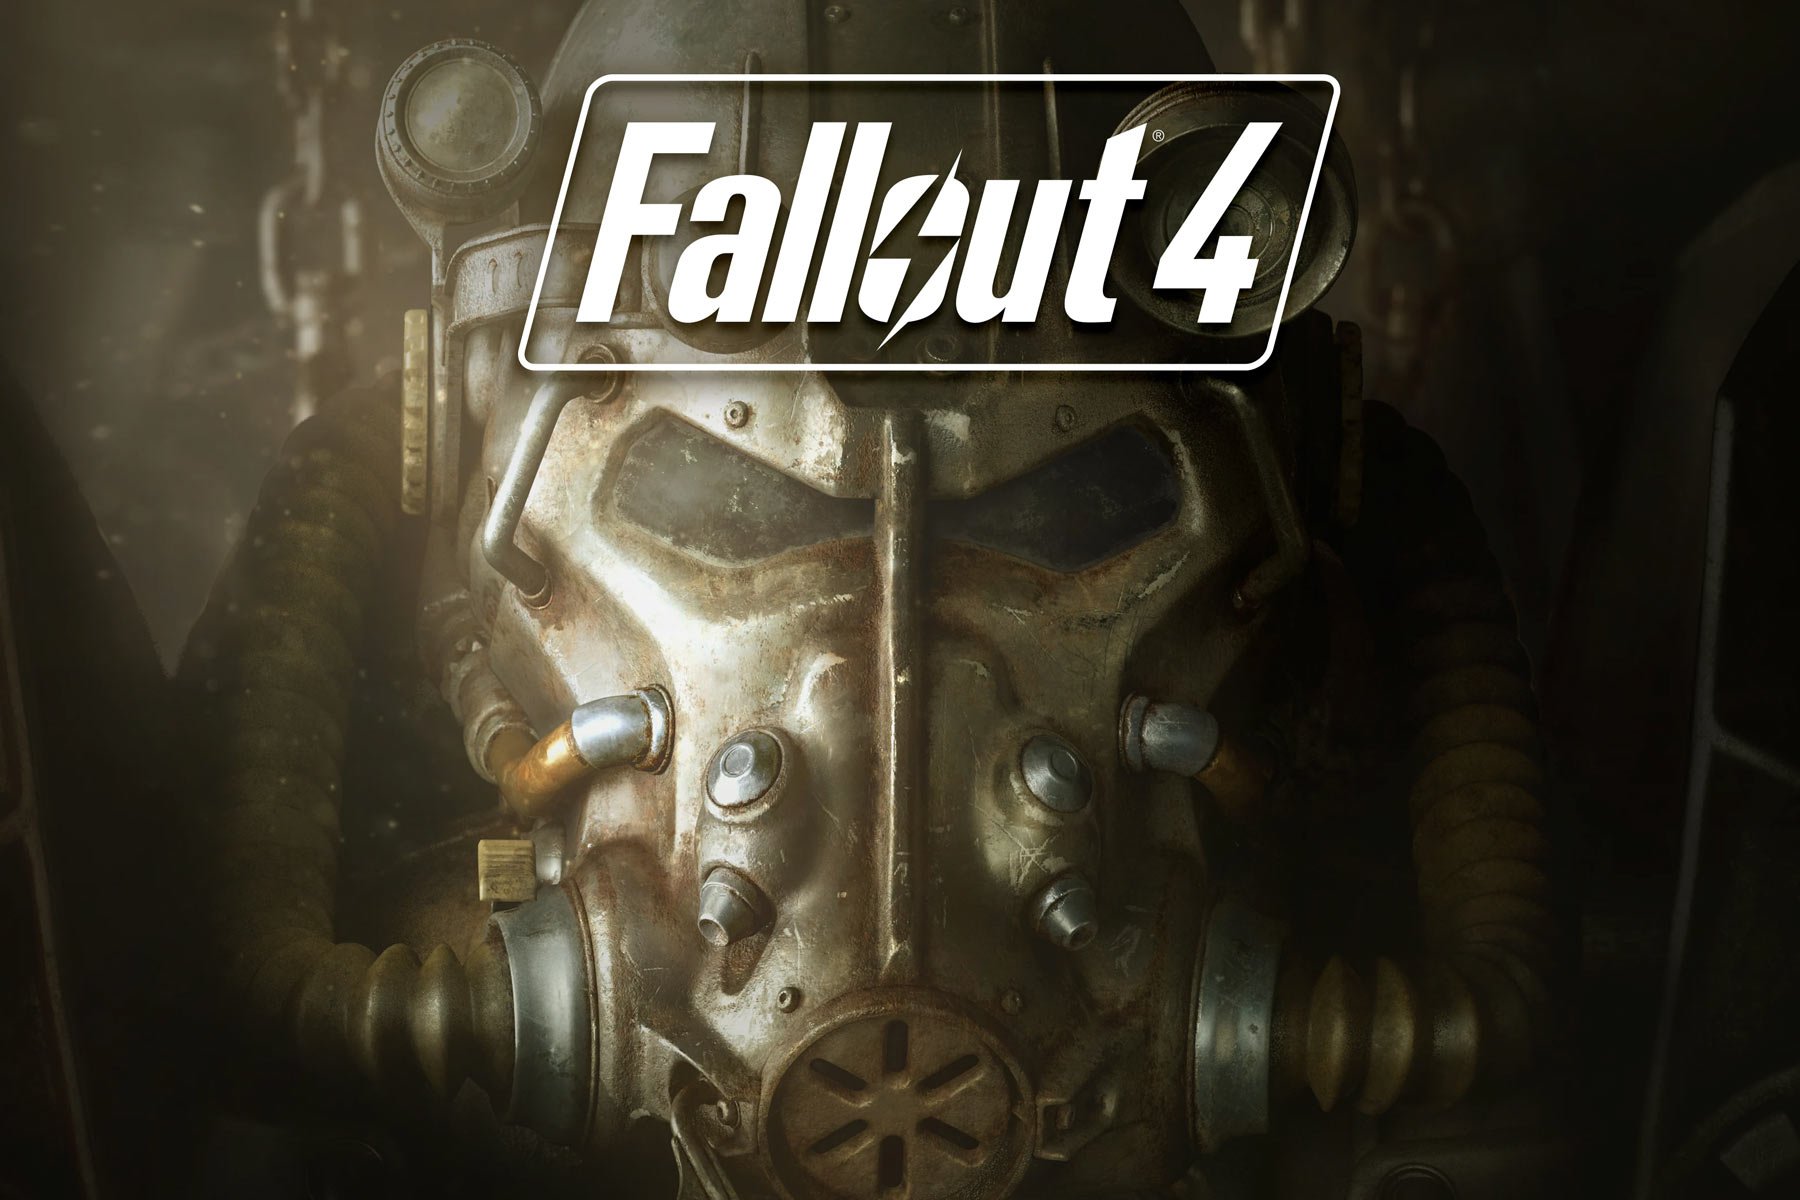 Get ready vault dwellers as Fallout 4 next-gen version is almost ready to drop